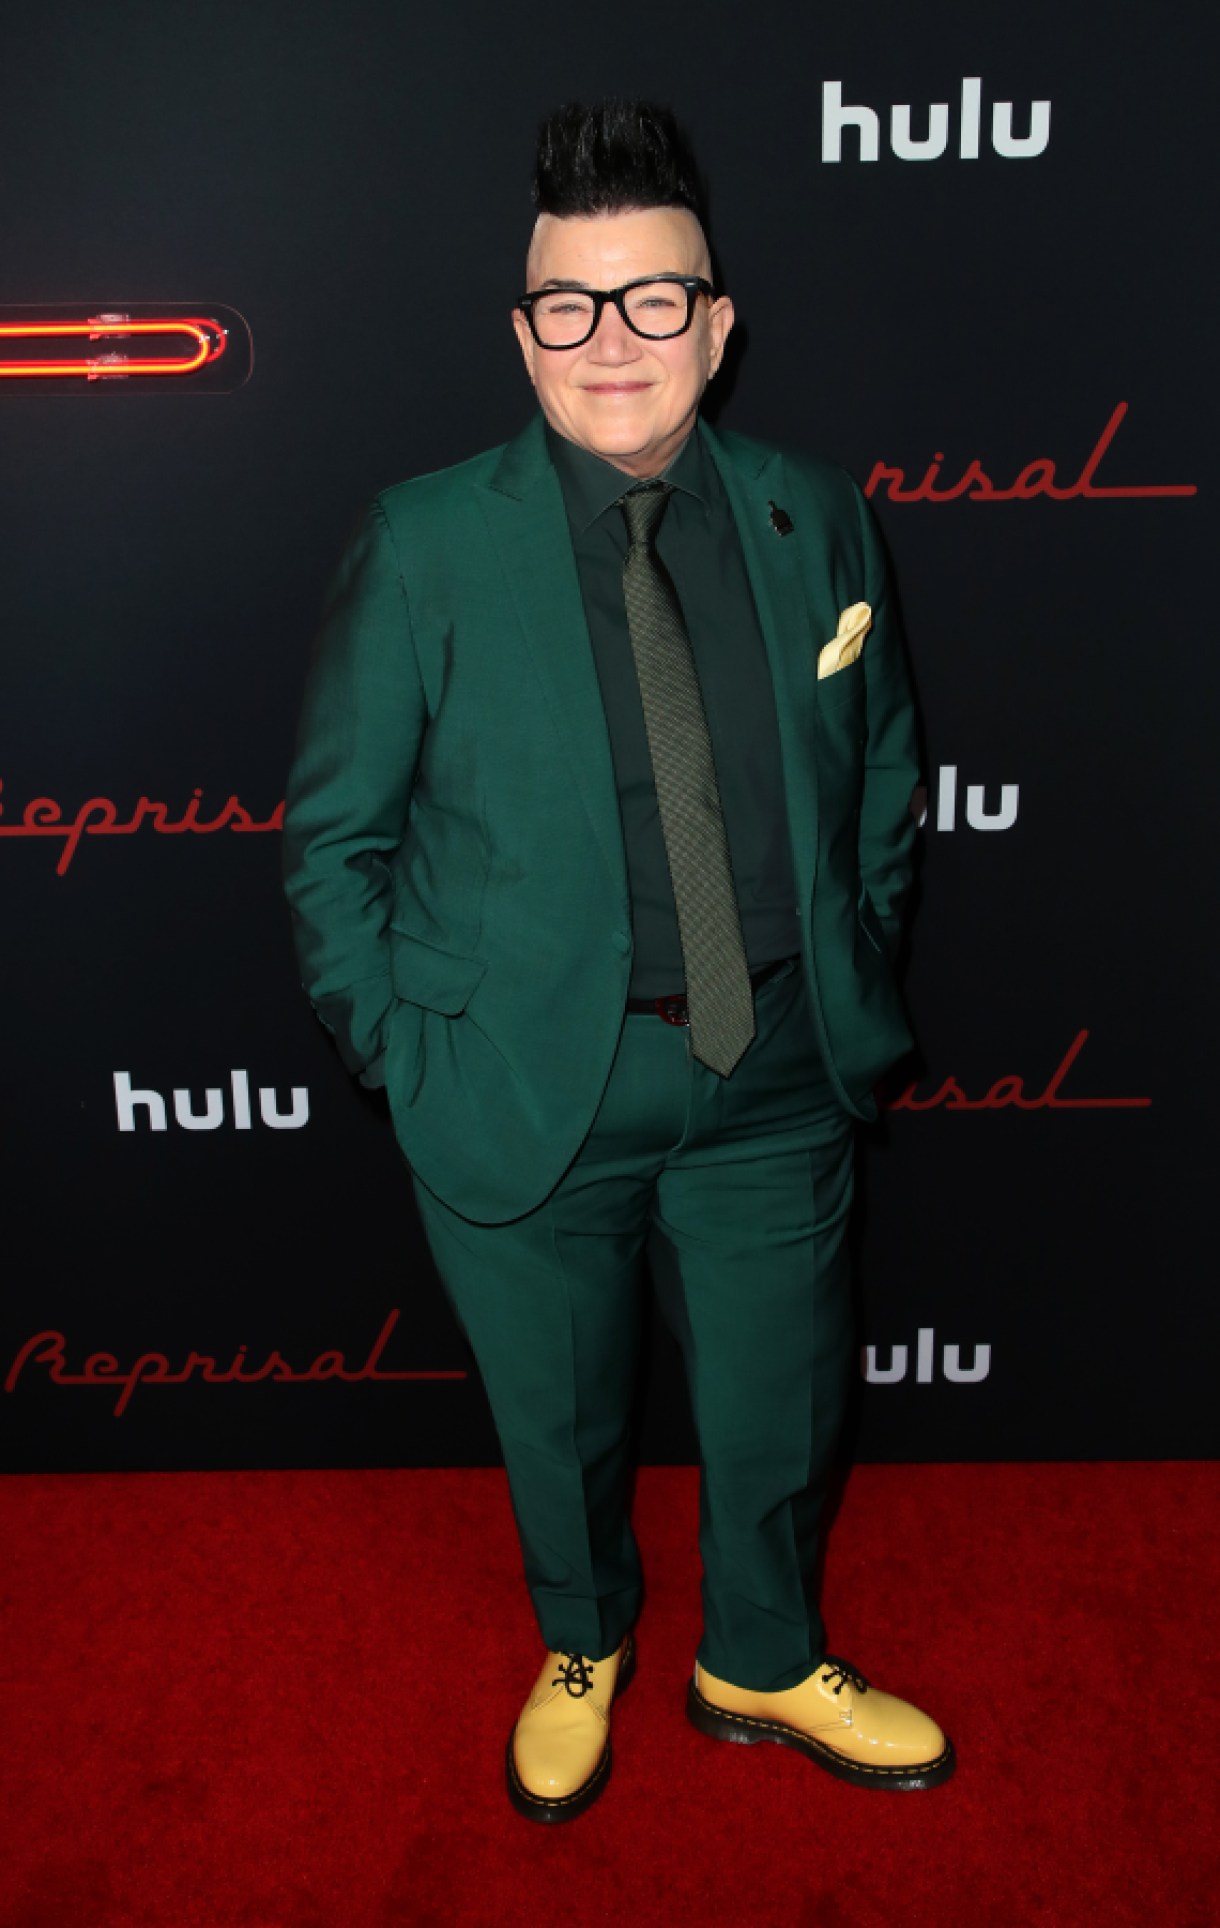 HOLLYWOOD, CALIFORNIA - DECEMBER 05: Lea DeLaria attends the premiere of Hulu's "Reprisal" Season One at ArcLight Cinemas on December 05, 2019 in Hollywood, California. (Photo by David Livingston/Getty Images)